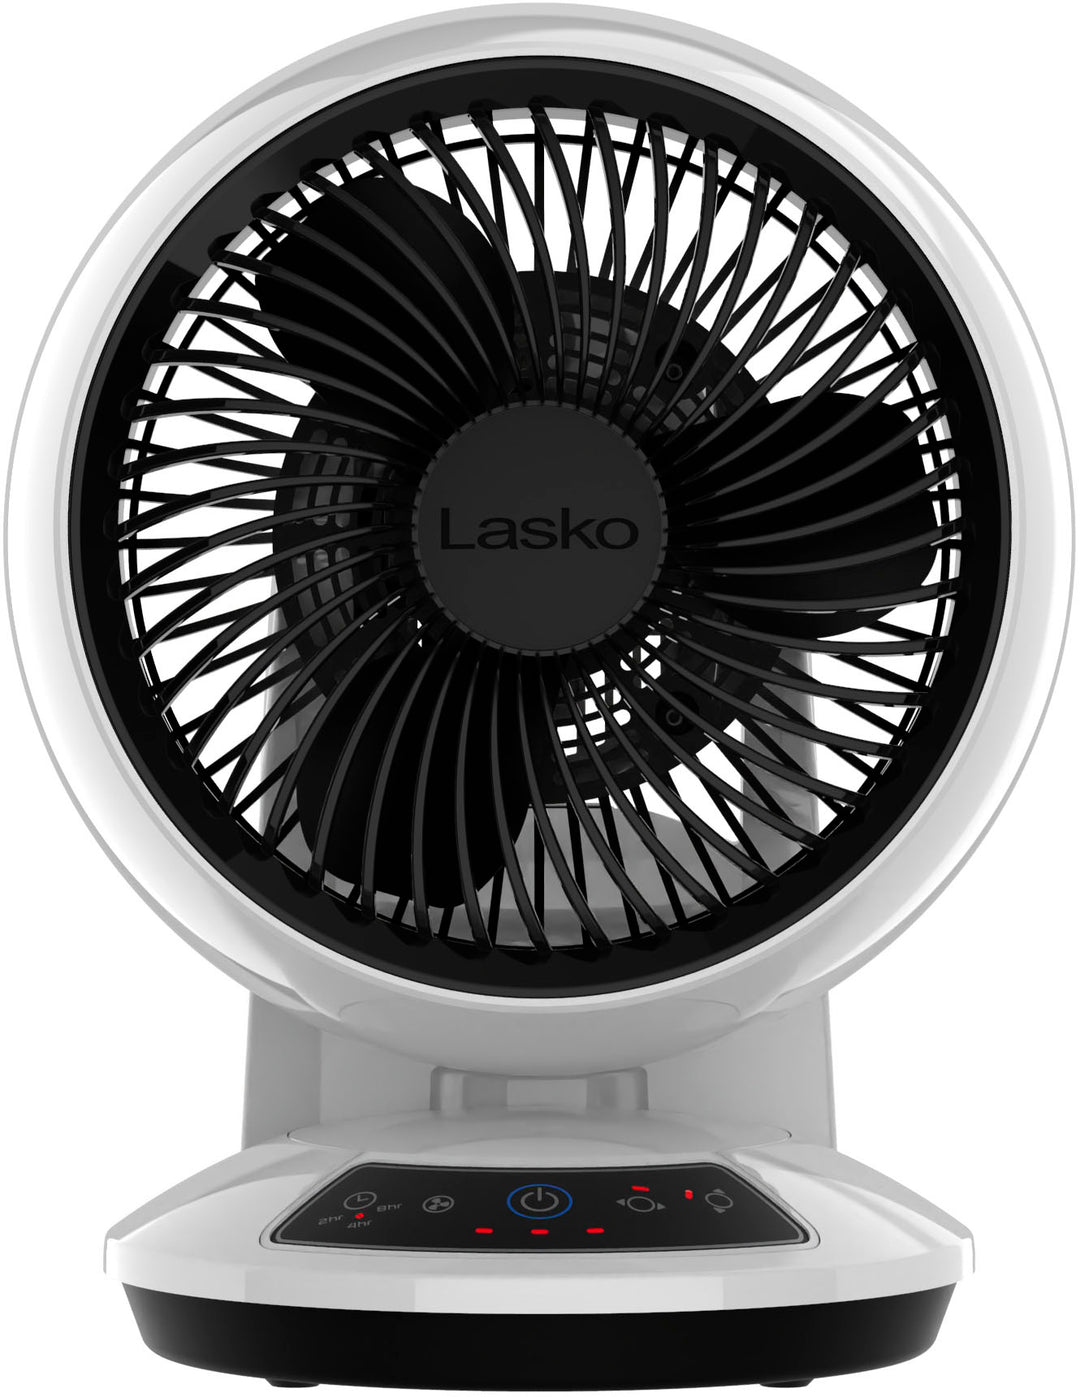 Lasko Whirlwind Orbital Motion Air Circulator Fan with Timer and Remote Control - White_0